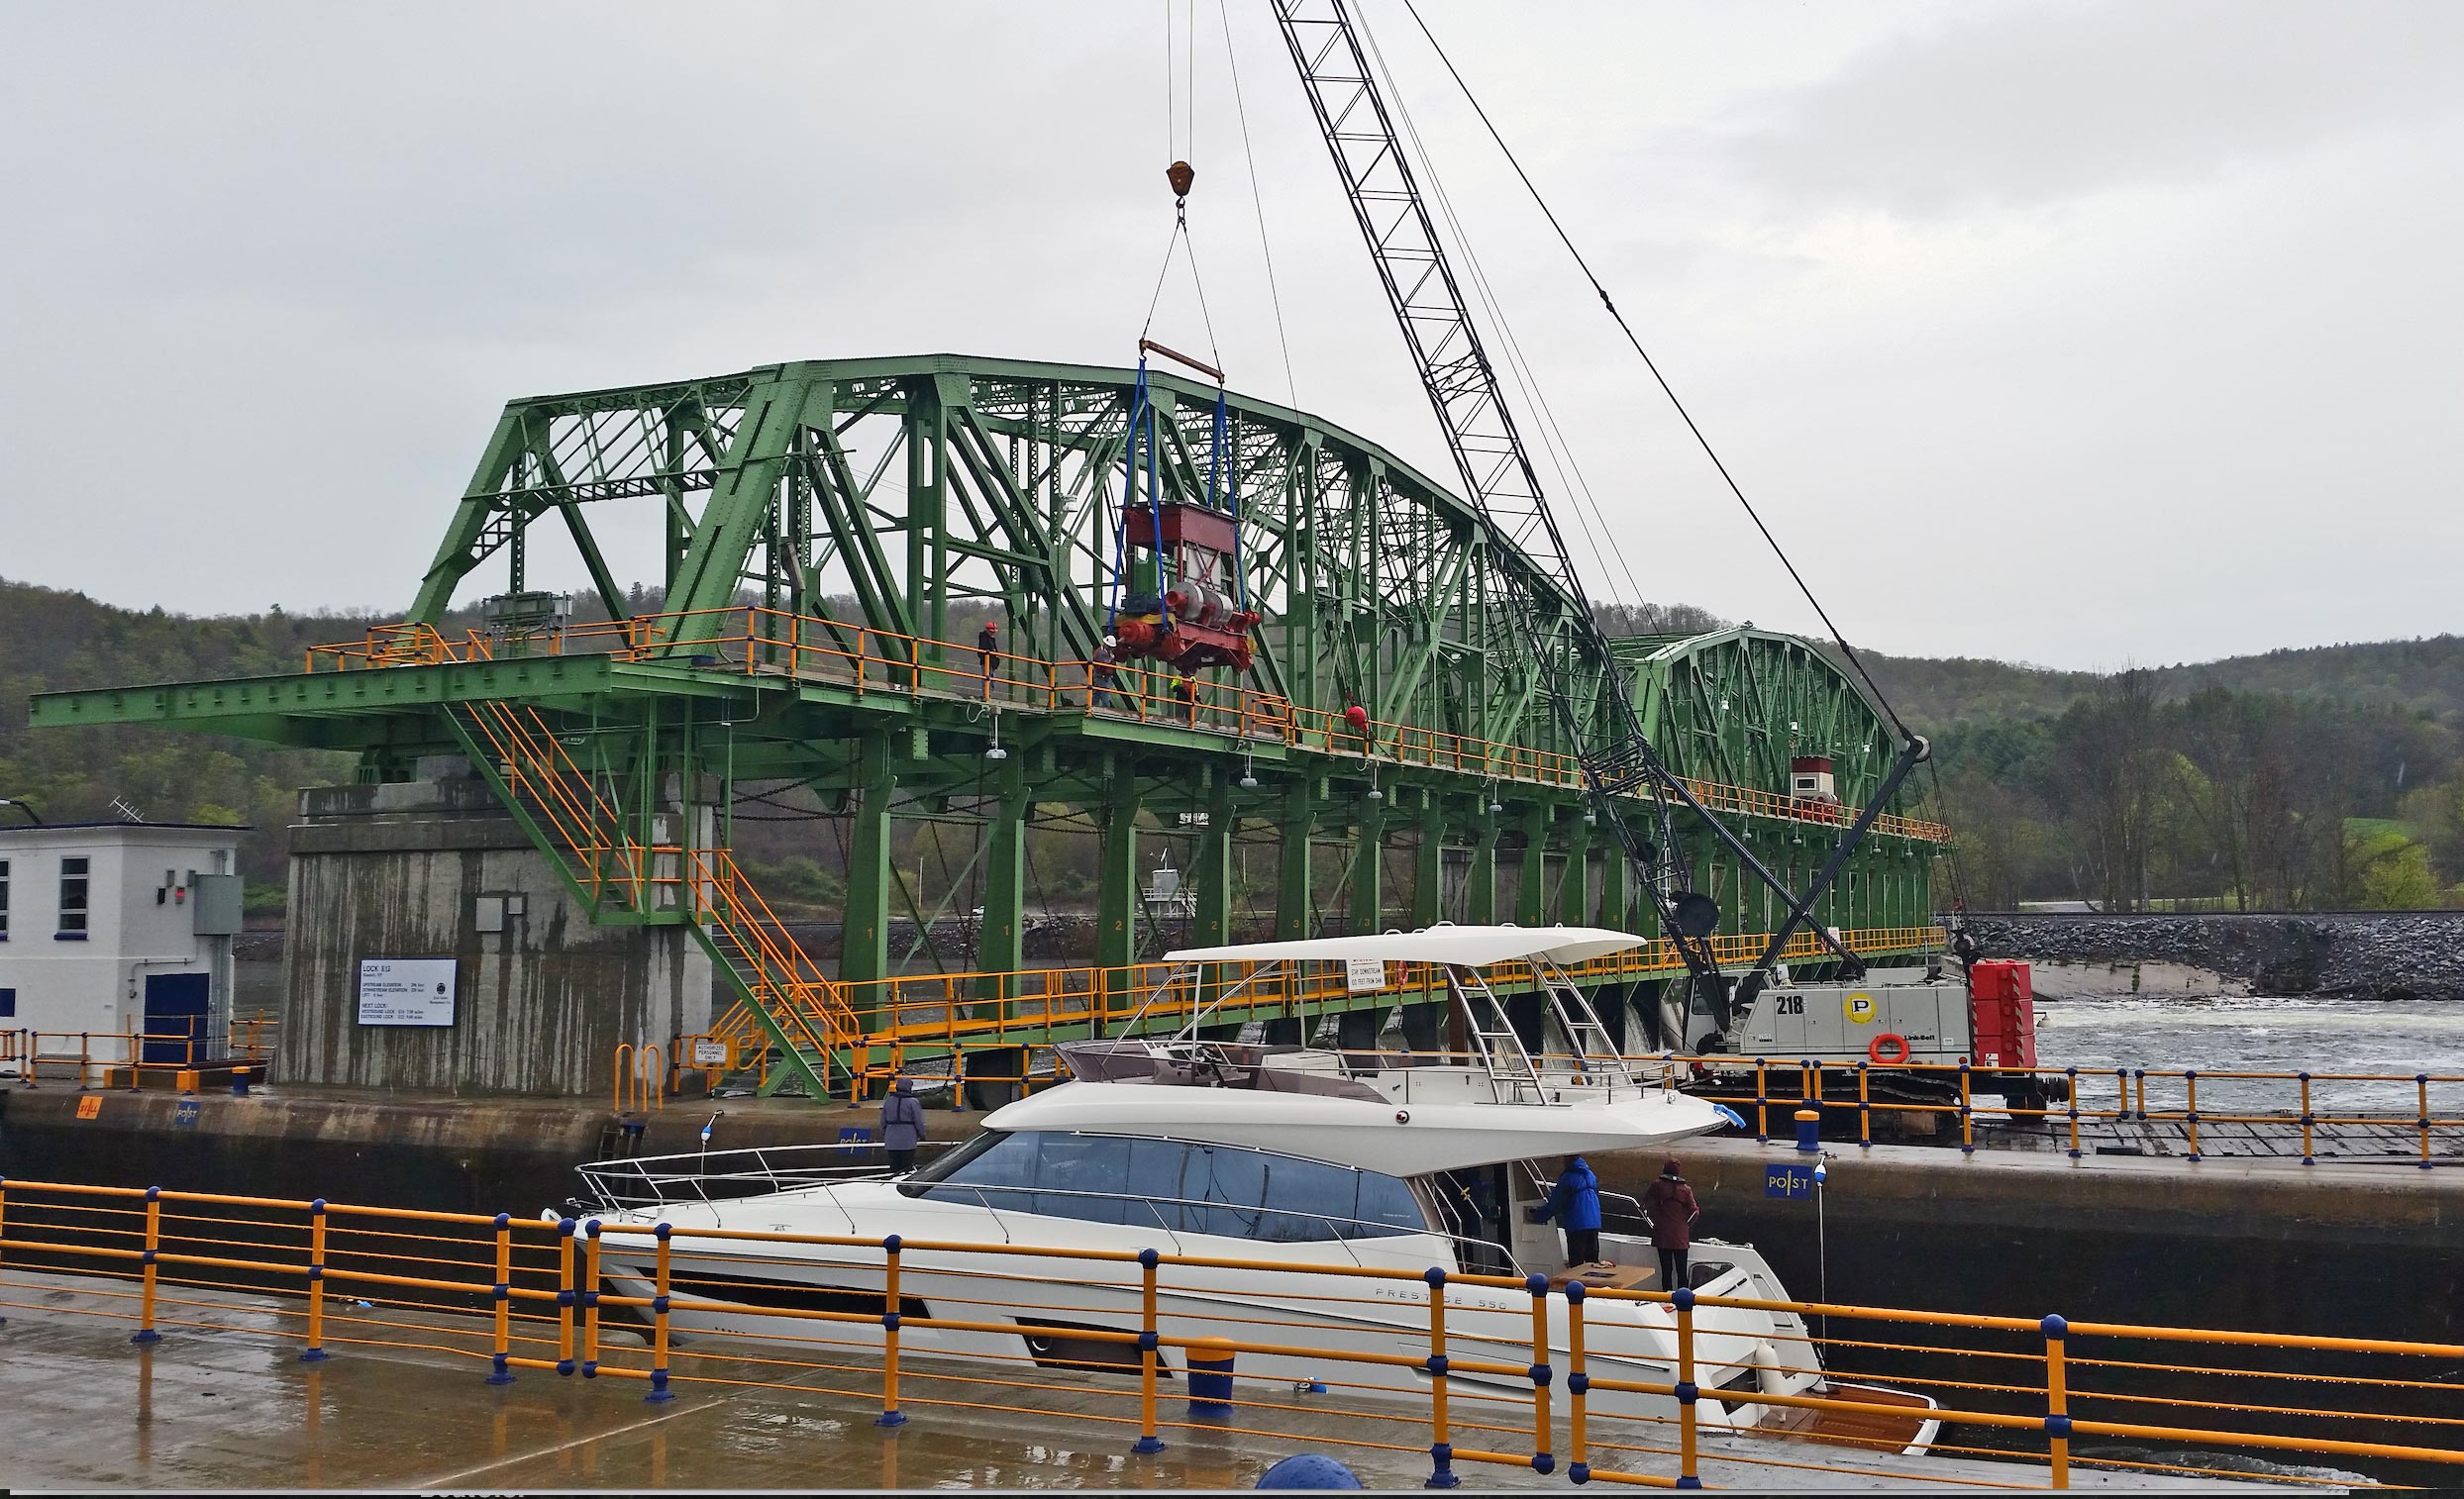 Photo Caption: The enactment of a federal bill supporting water infrastructure improvements will also benefit boat owners, says BoatUS (credit NYS Canal Corporation)